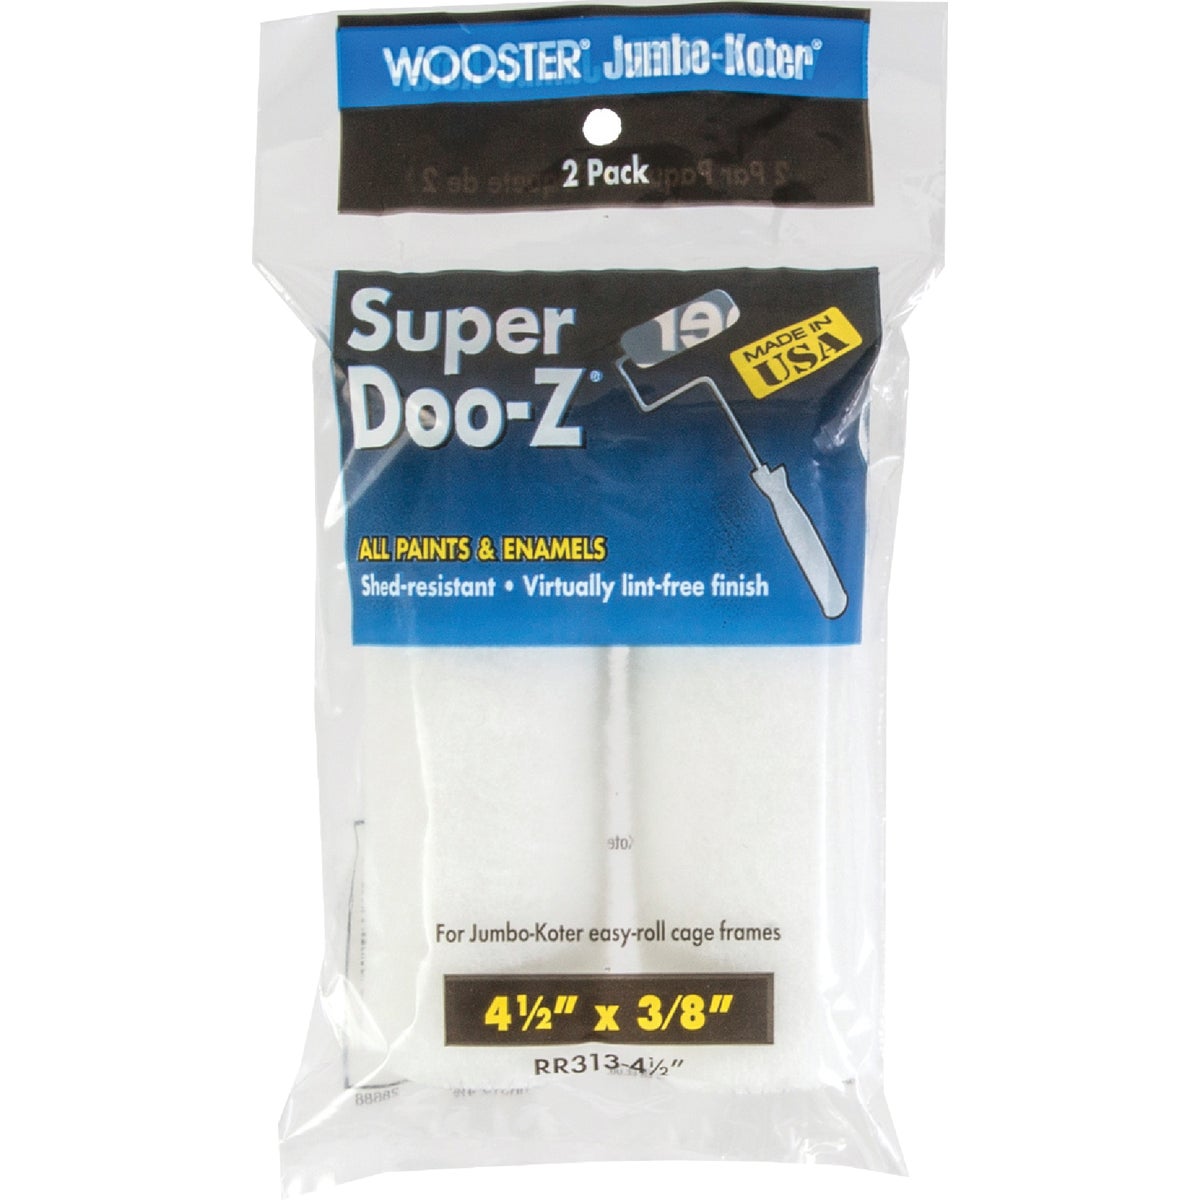 Item 771071, Shed-resistant white fabric for a virtually lint-free finish with all 